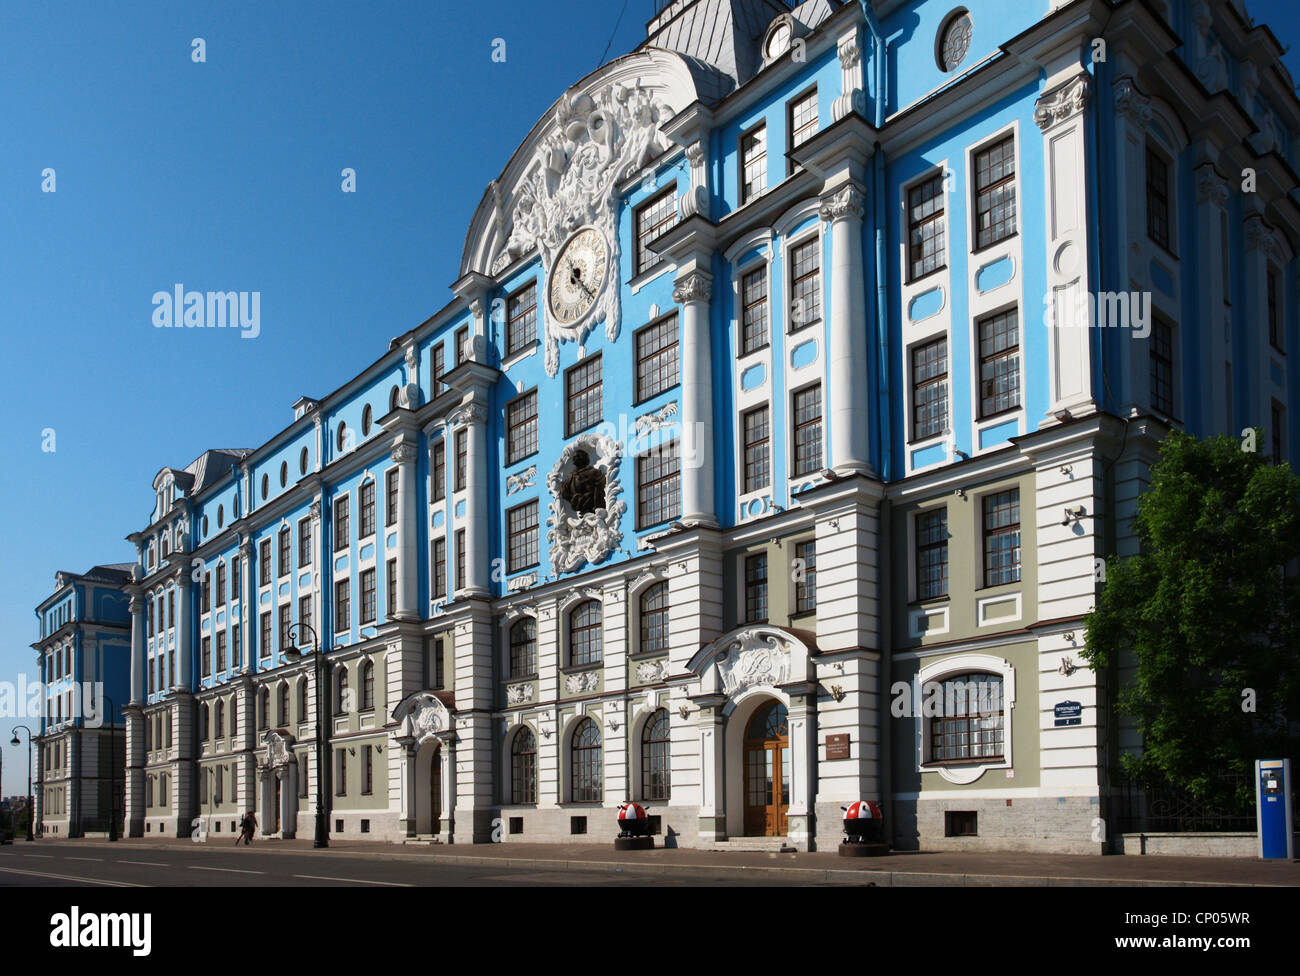 A typical ornate classical building in St Petersburg Russia Stock Photo